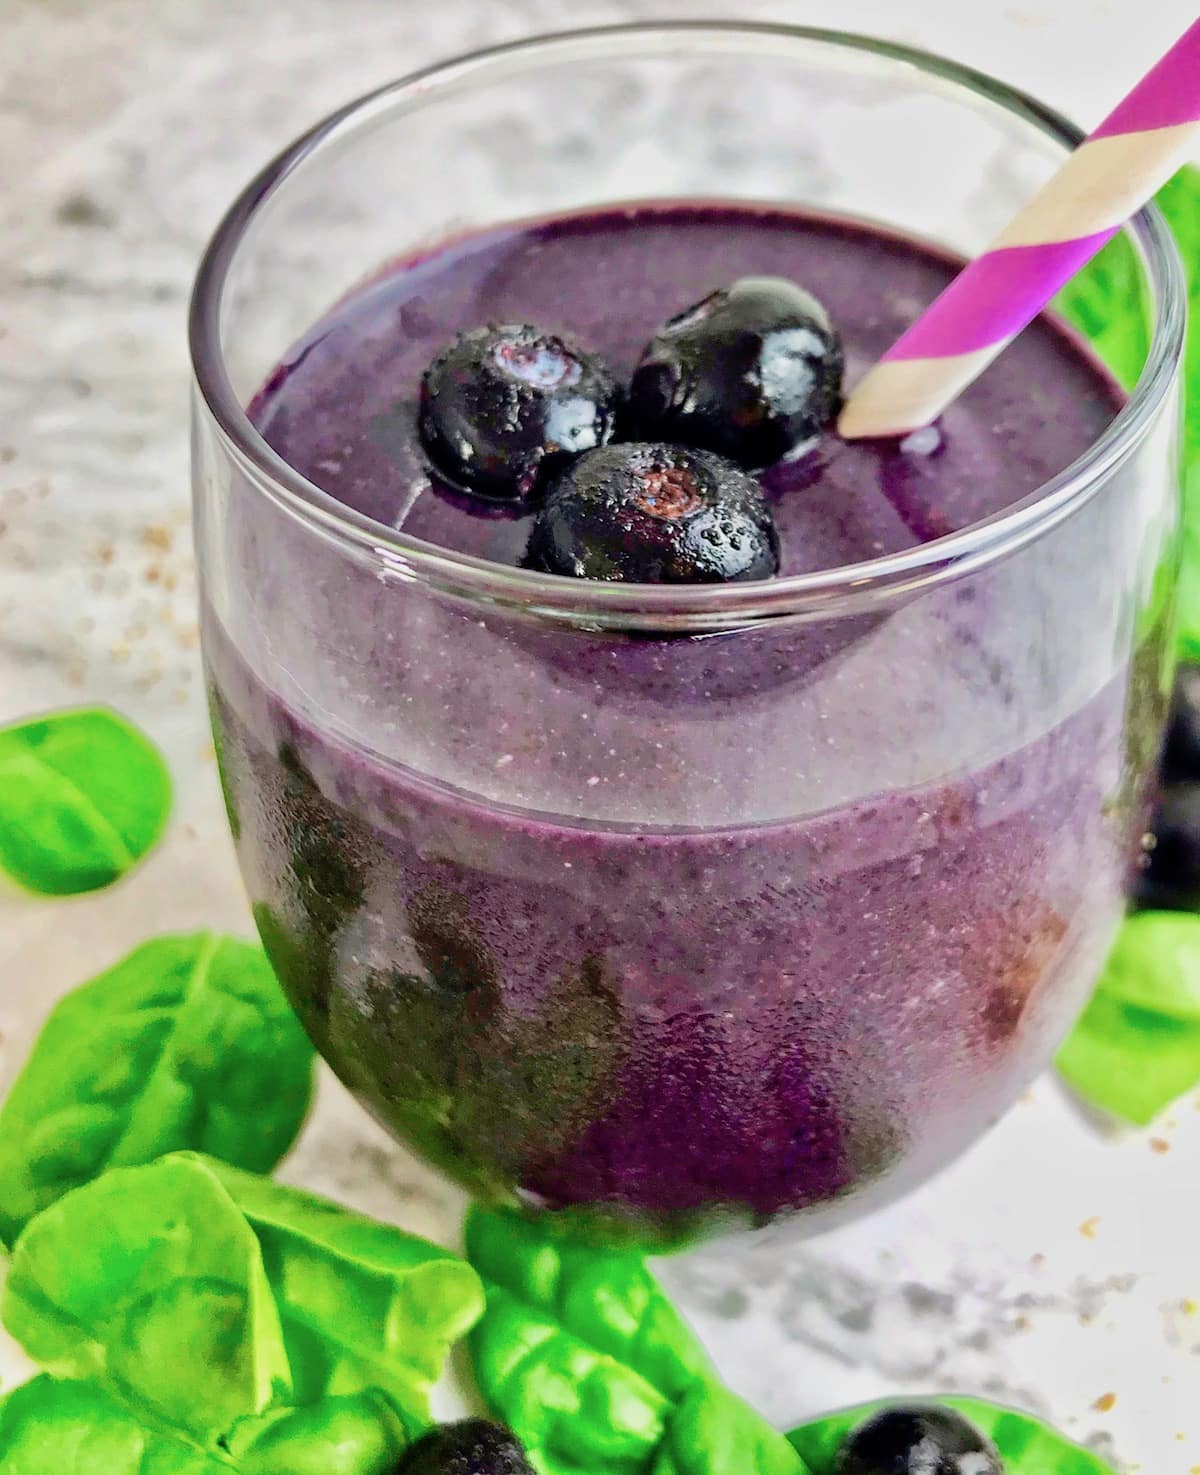 Blueberry smoothie in a stemless wine glass with blueberries on top and spinach surrounding the glass.